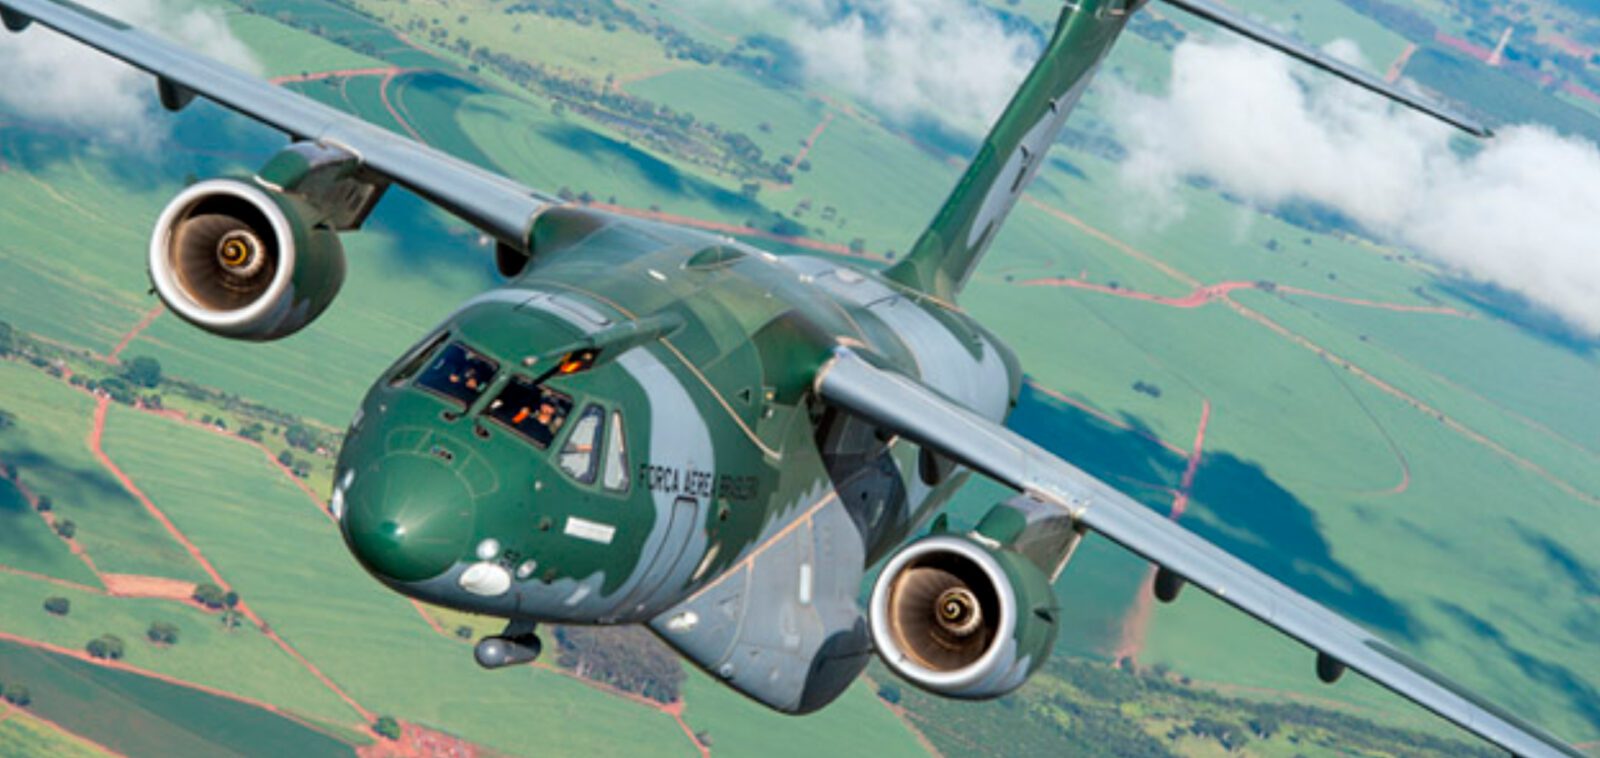 C-390 Millennium fleet operated by Brazilian Air Force completes 10,000 flight hours